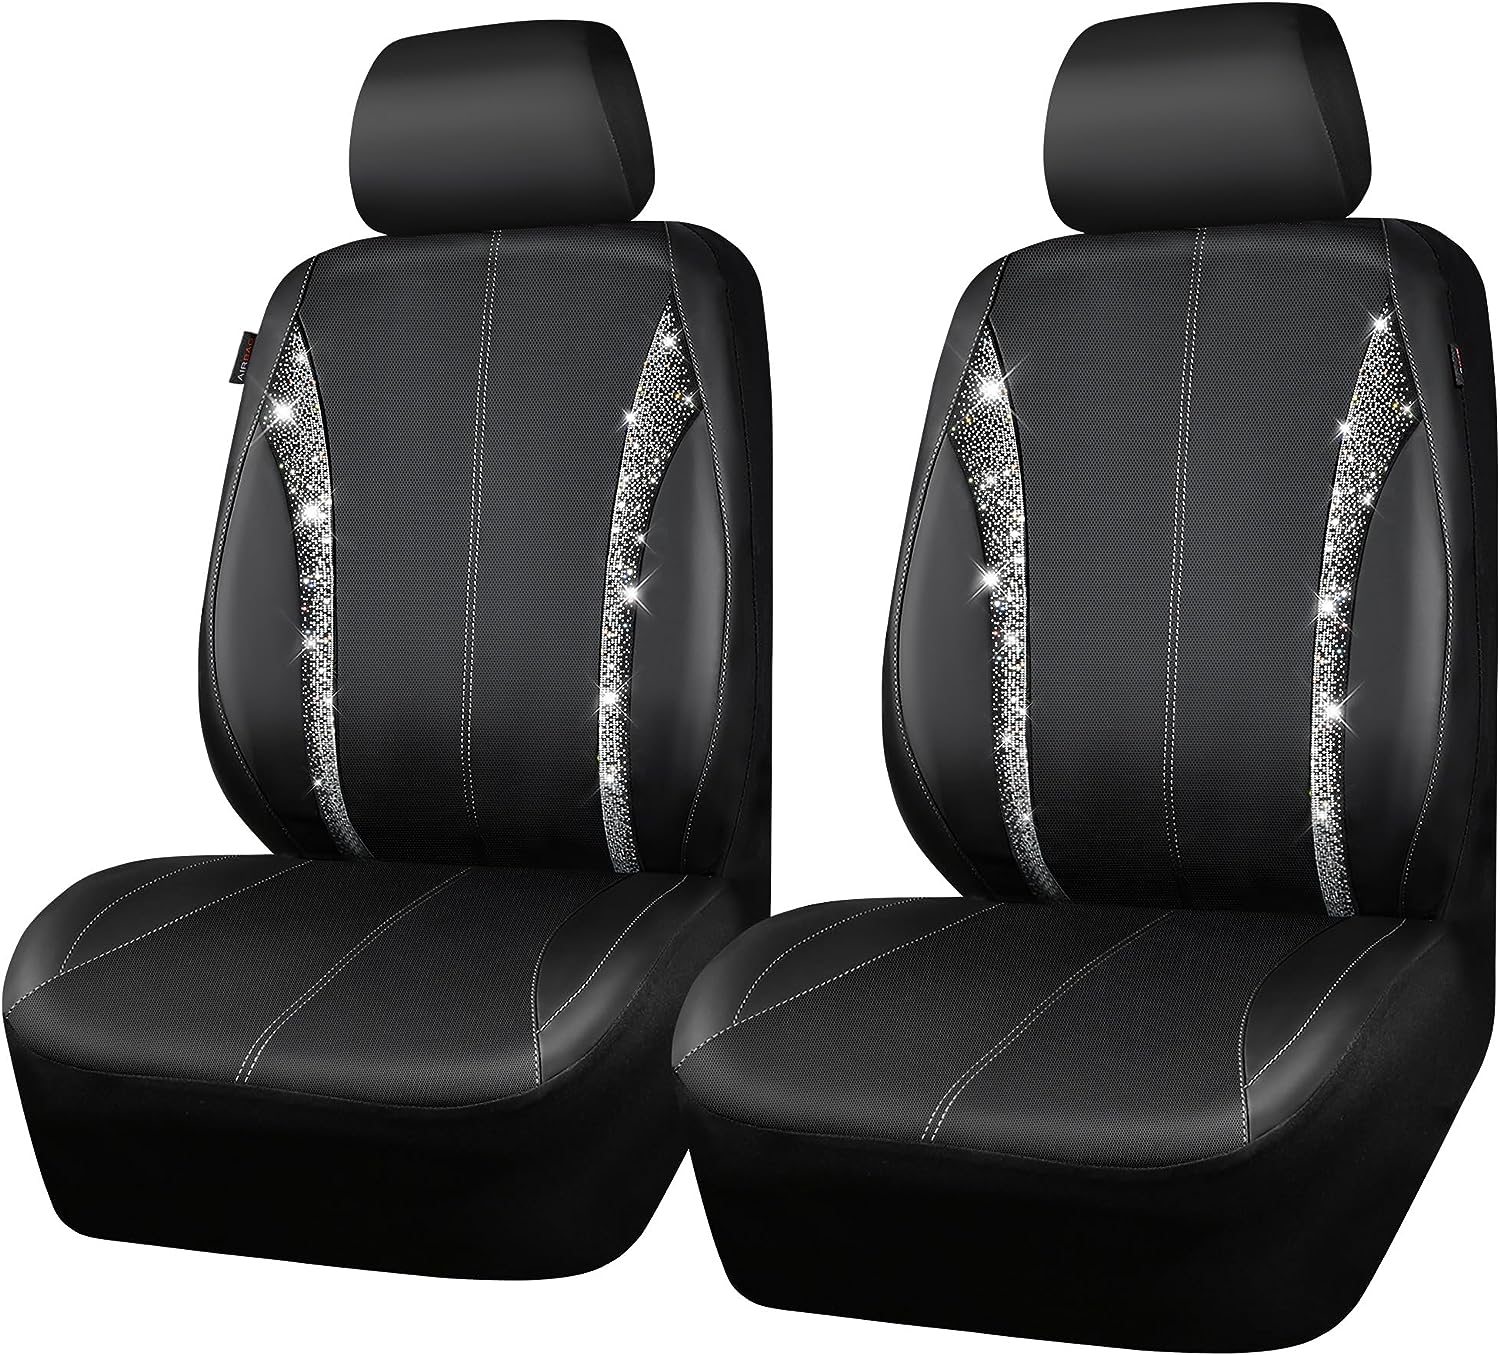 Bling Car Seat Cover Shining Rhinestone Diamond Bucket Universal Two Front Faux Leather Seat Covers-Silver